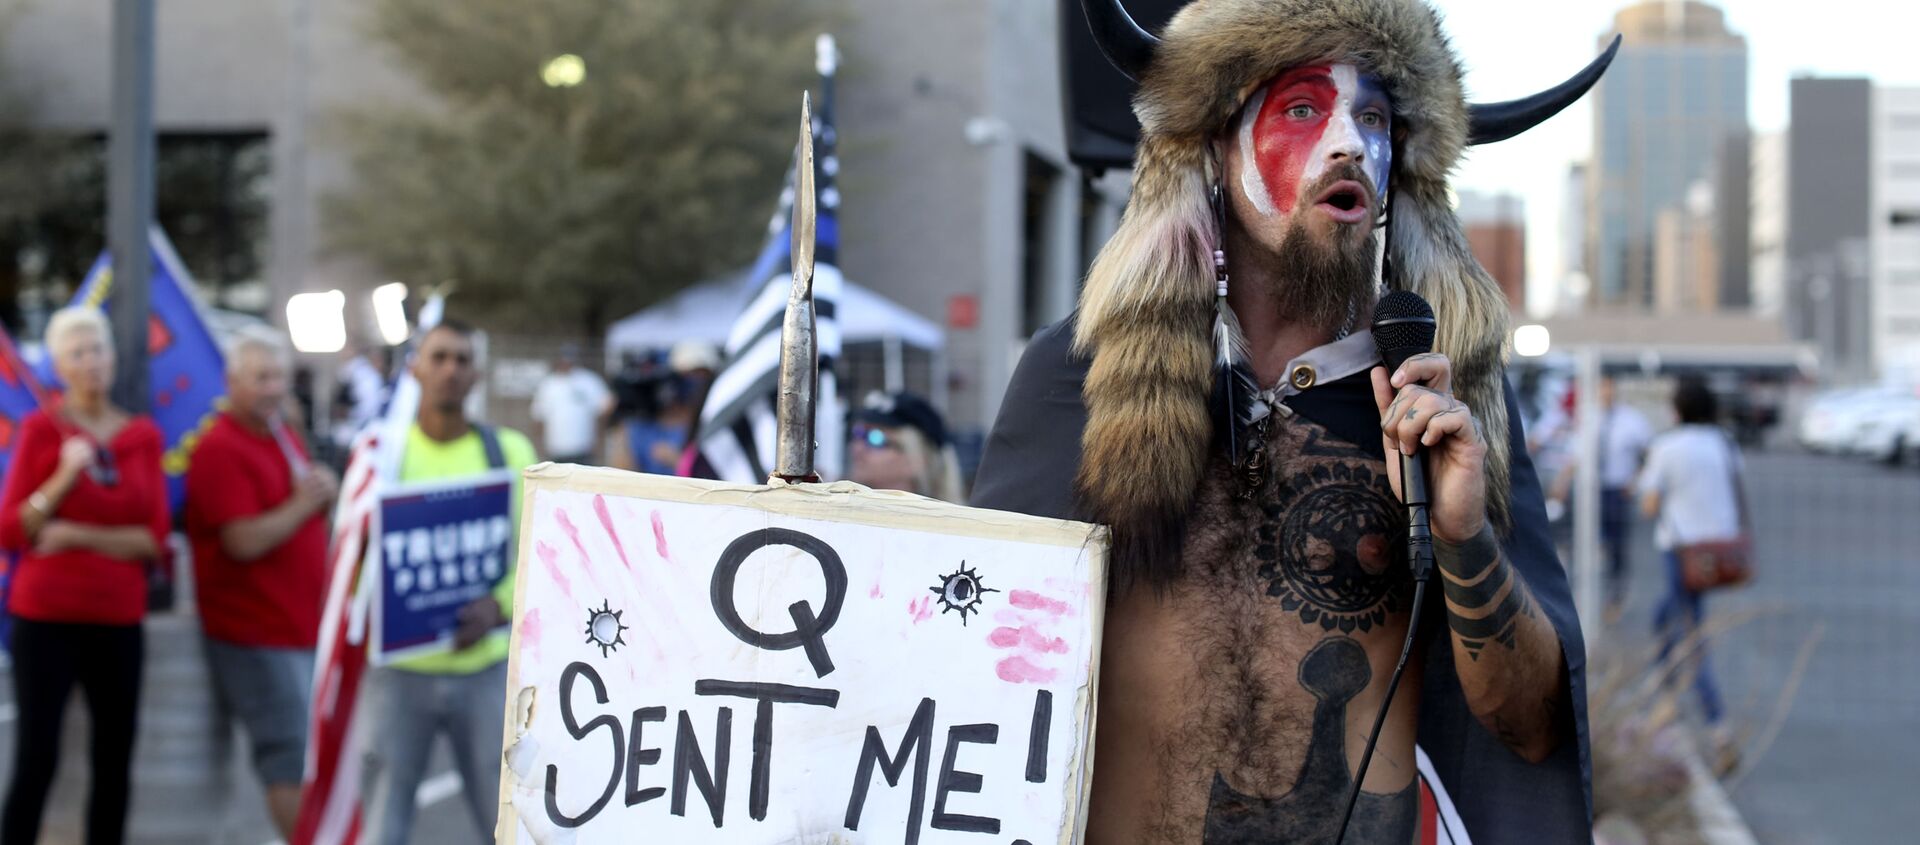 A Qanon believer speaks to a crowd of President Donald Trump supporters outside of the Maricopa County Recorder's Office where votes in the general election are being counted, in Phoenix, Thursday, Nov. 5, 2020. - 俄罗斯卫星通讯社, 1920, 09.01.2021